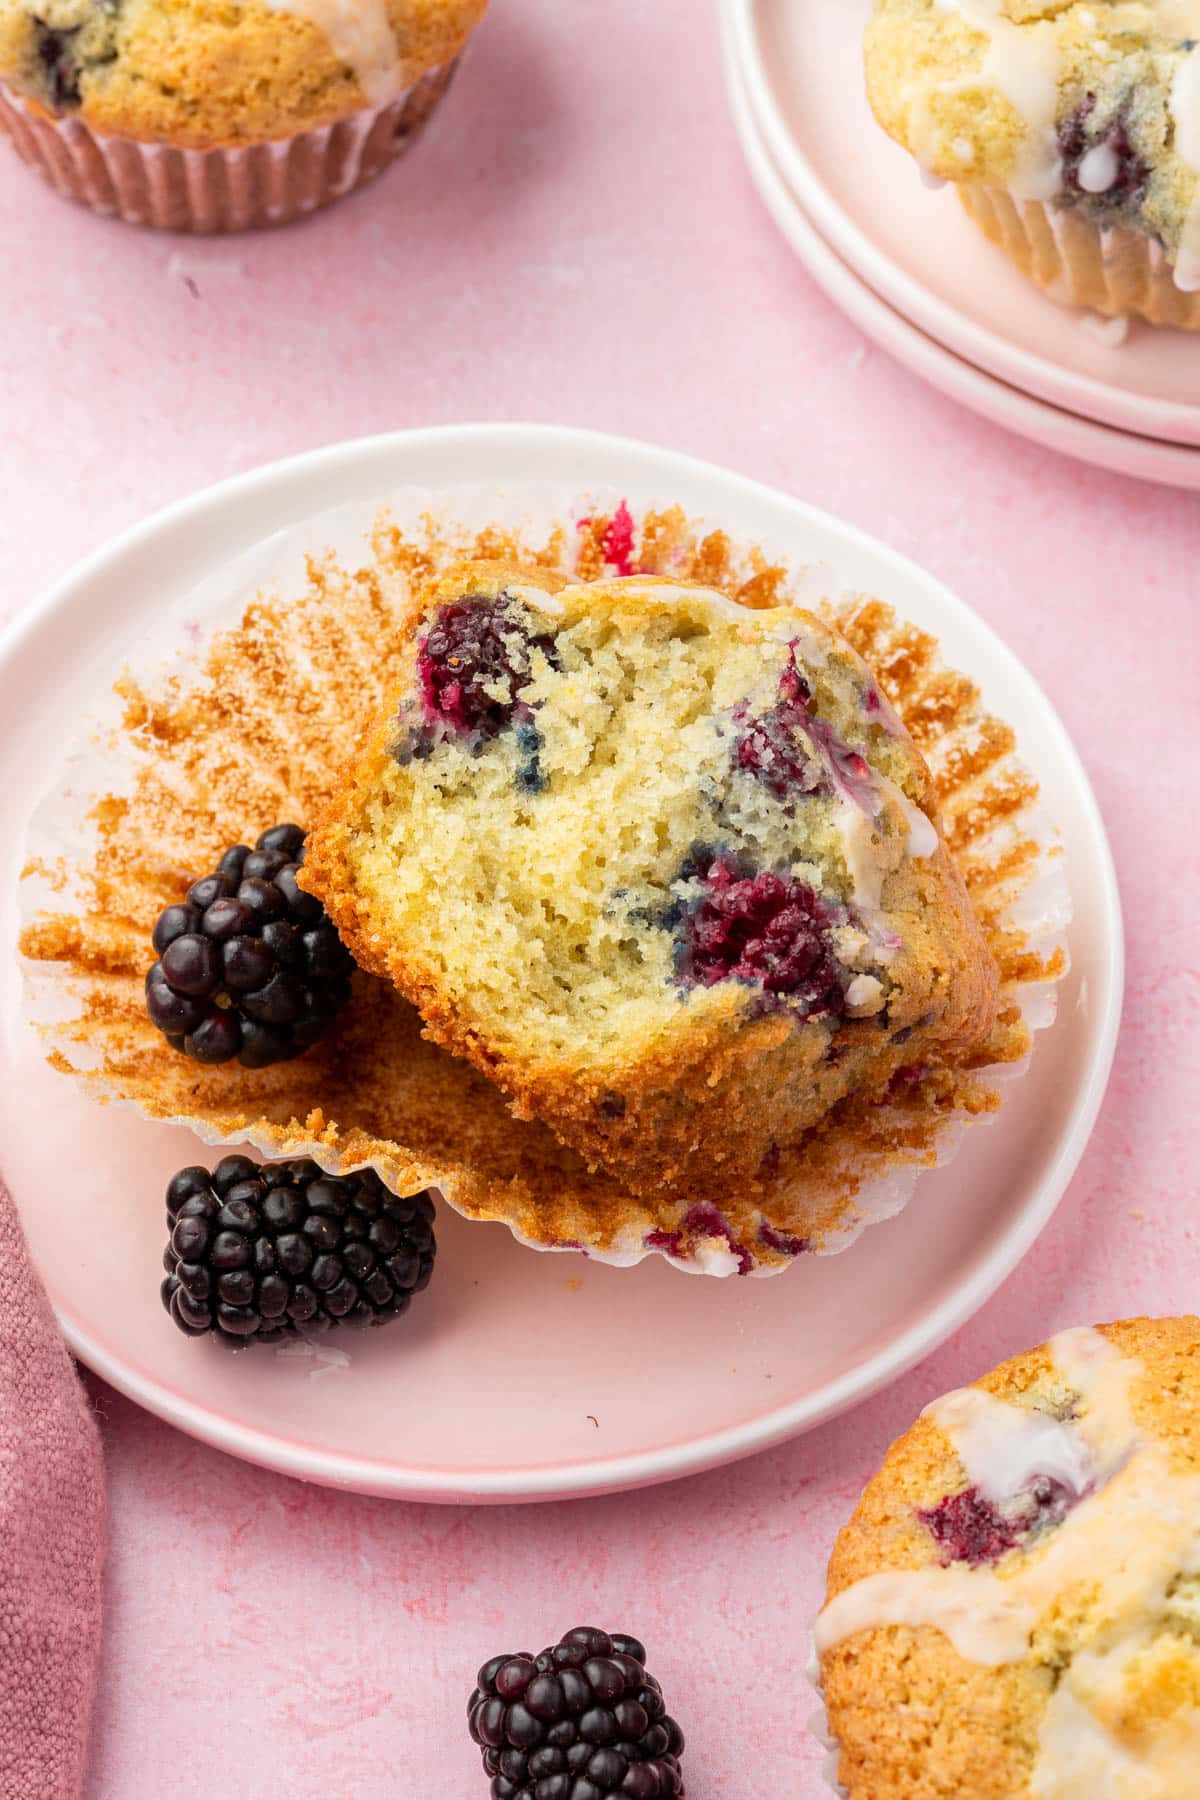 A gluten-free blackberry muffin on a dessert plate that has a bite taken out of it.